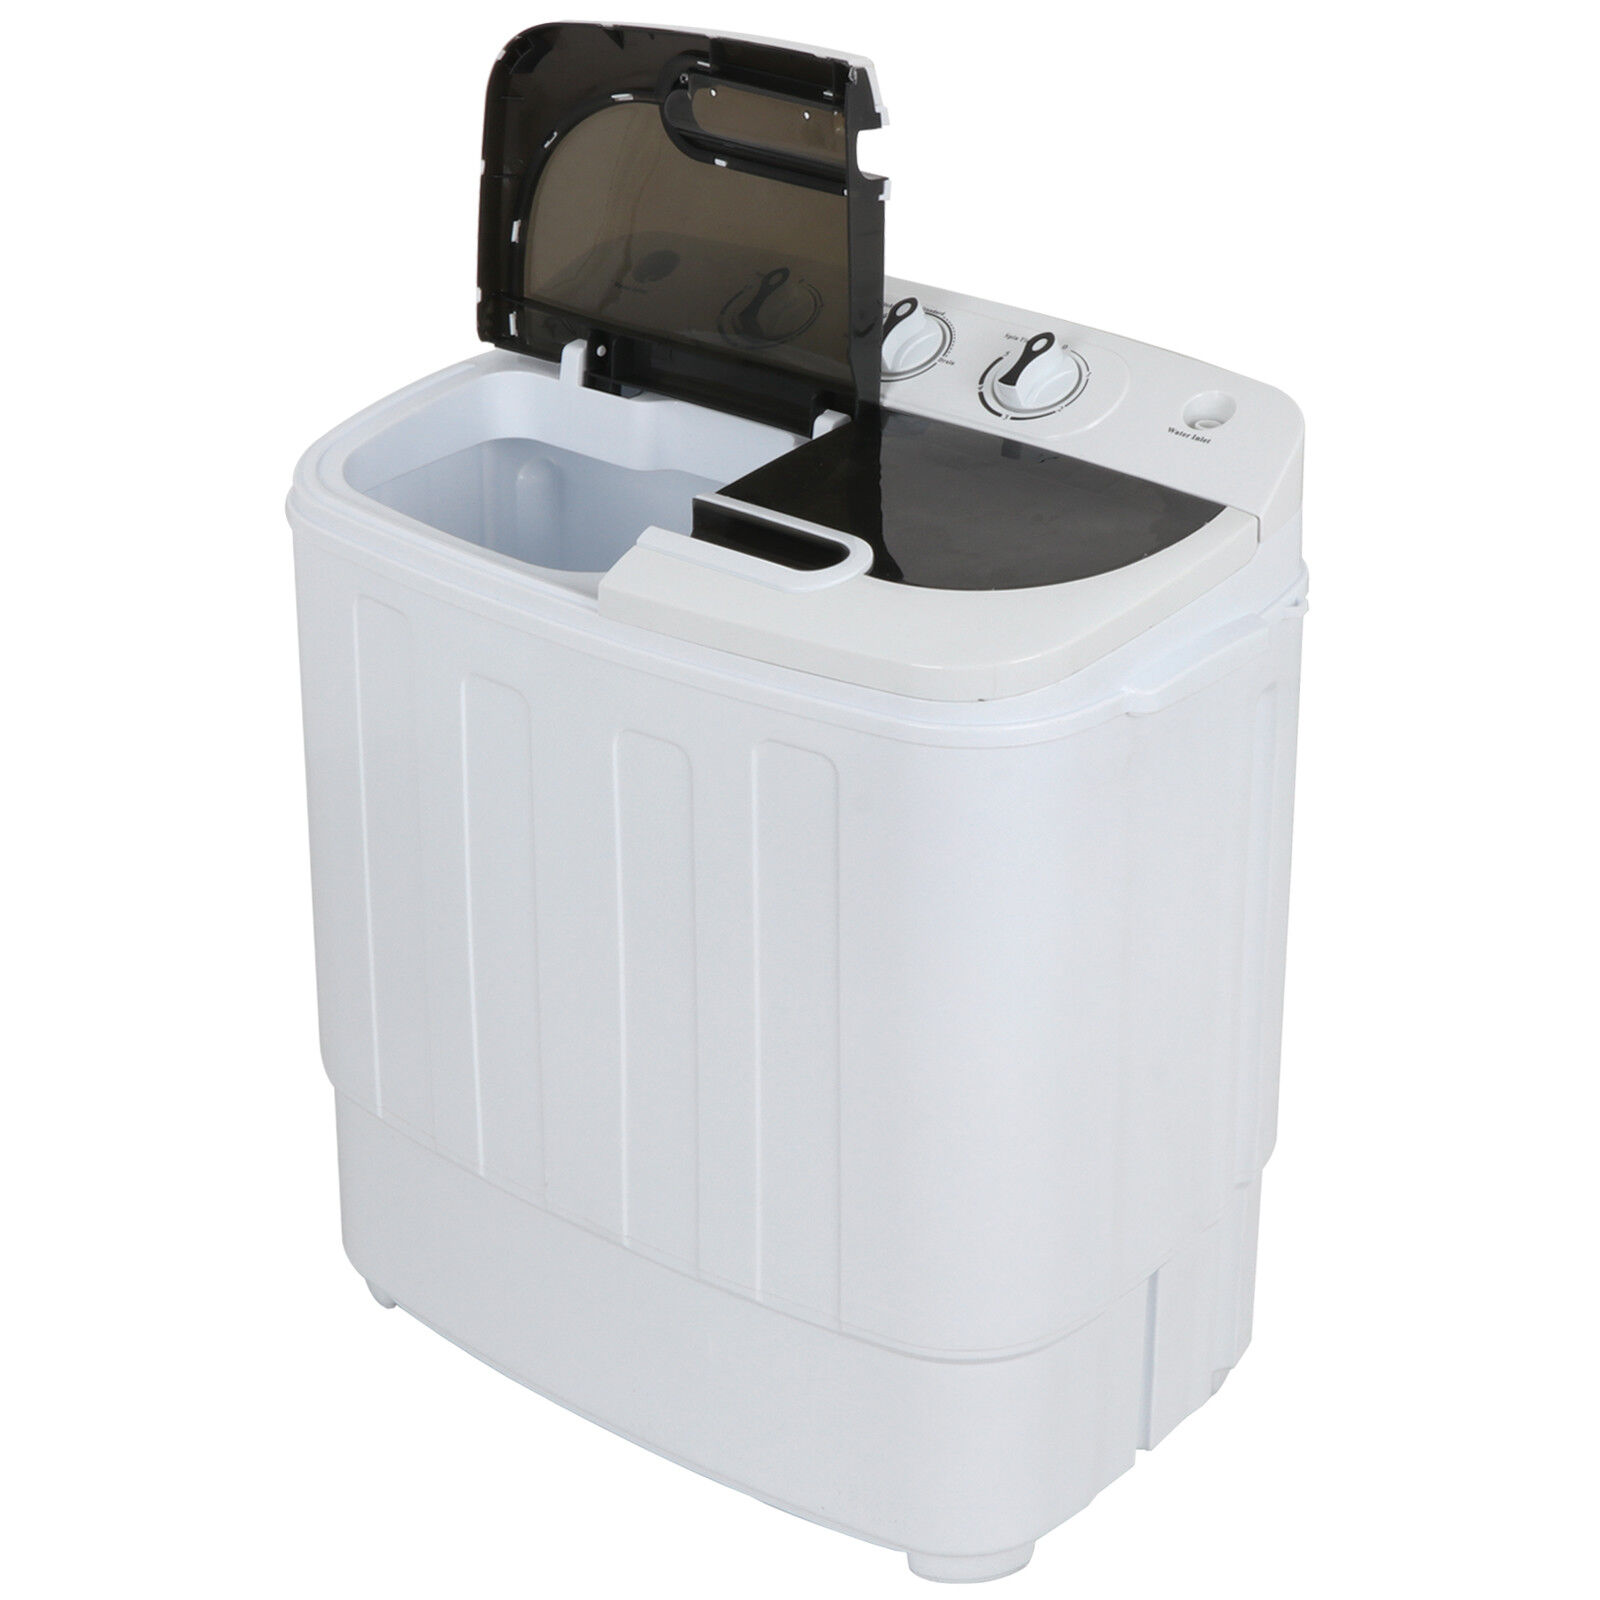 White Compact Portable Washer & Dryer Combo